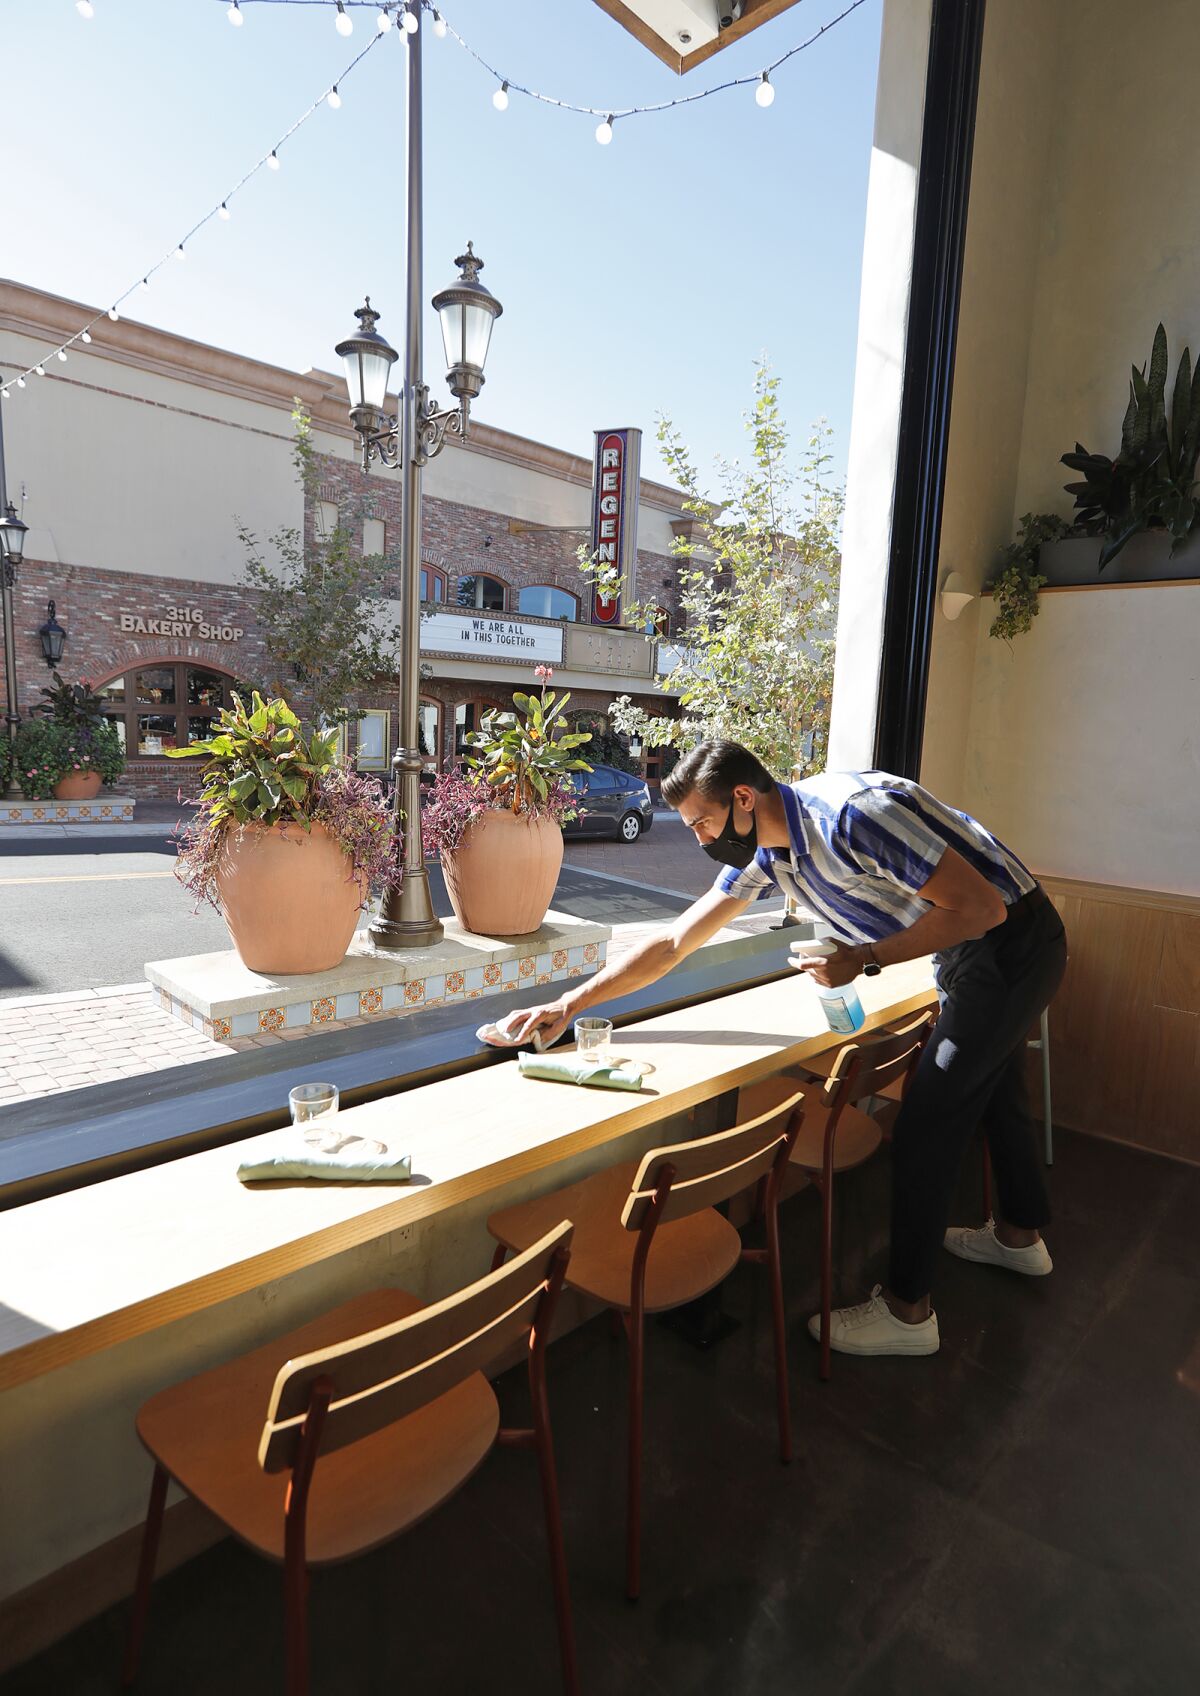 Owner George Barker opens the large bay windows at the new Mayfield restaurant in San Juan Capistrano.